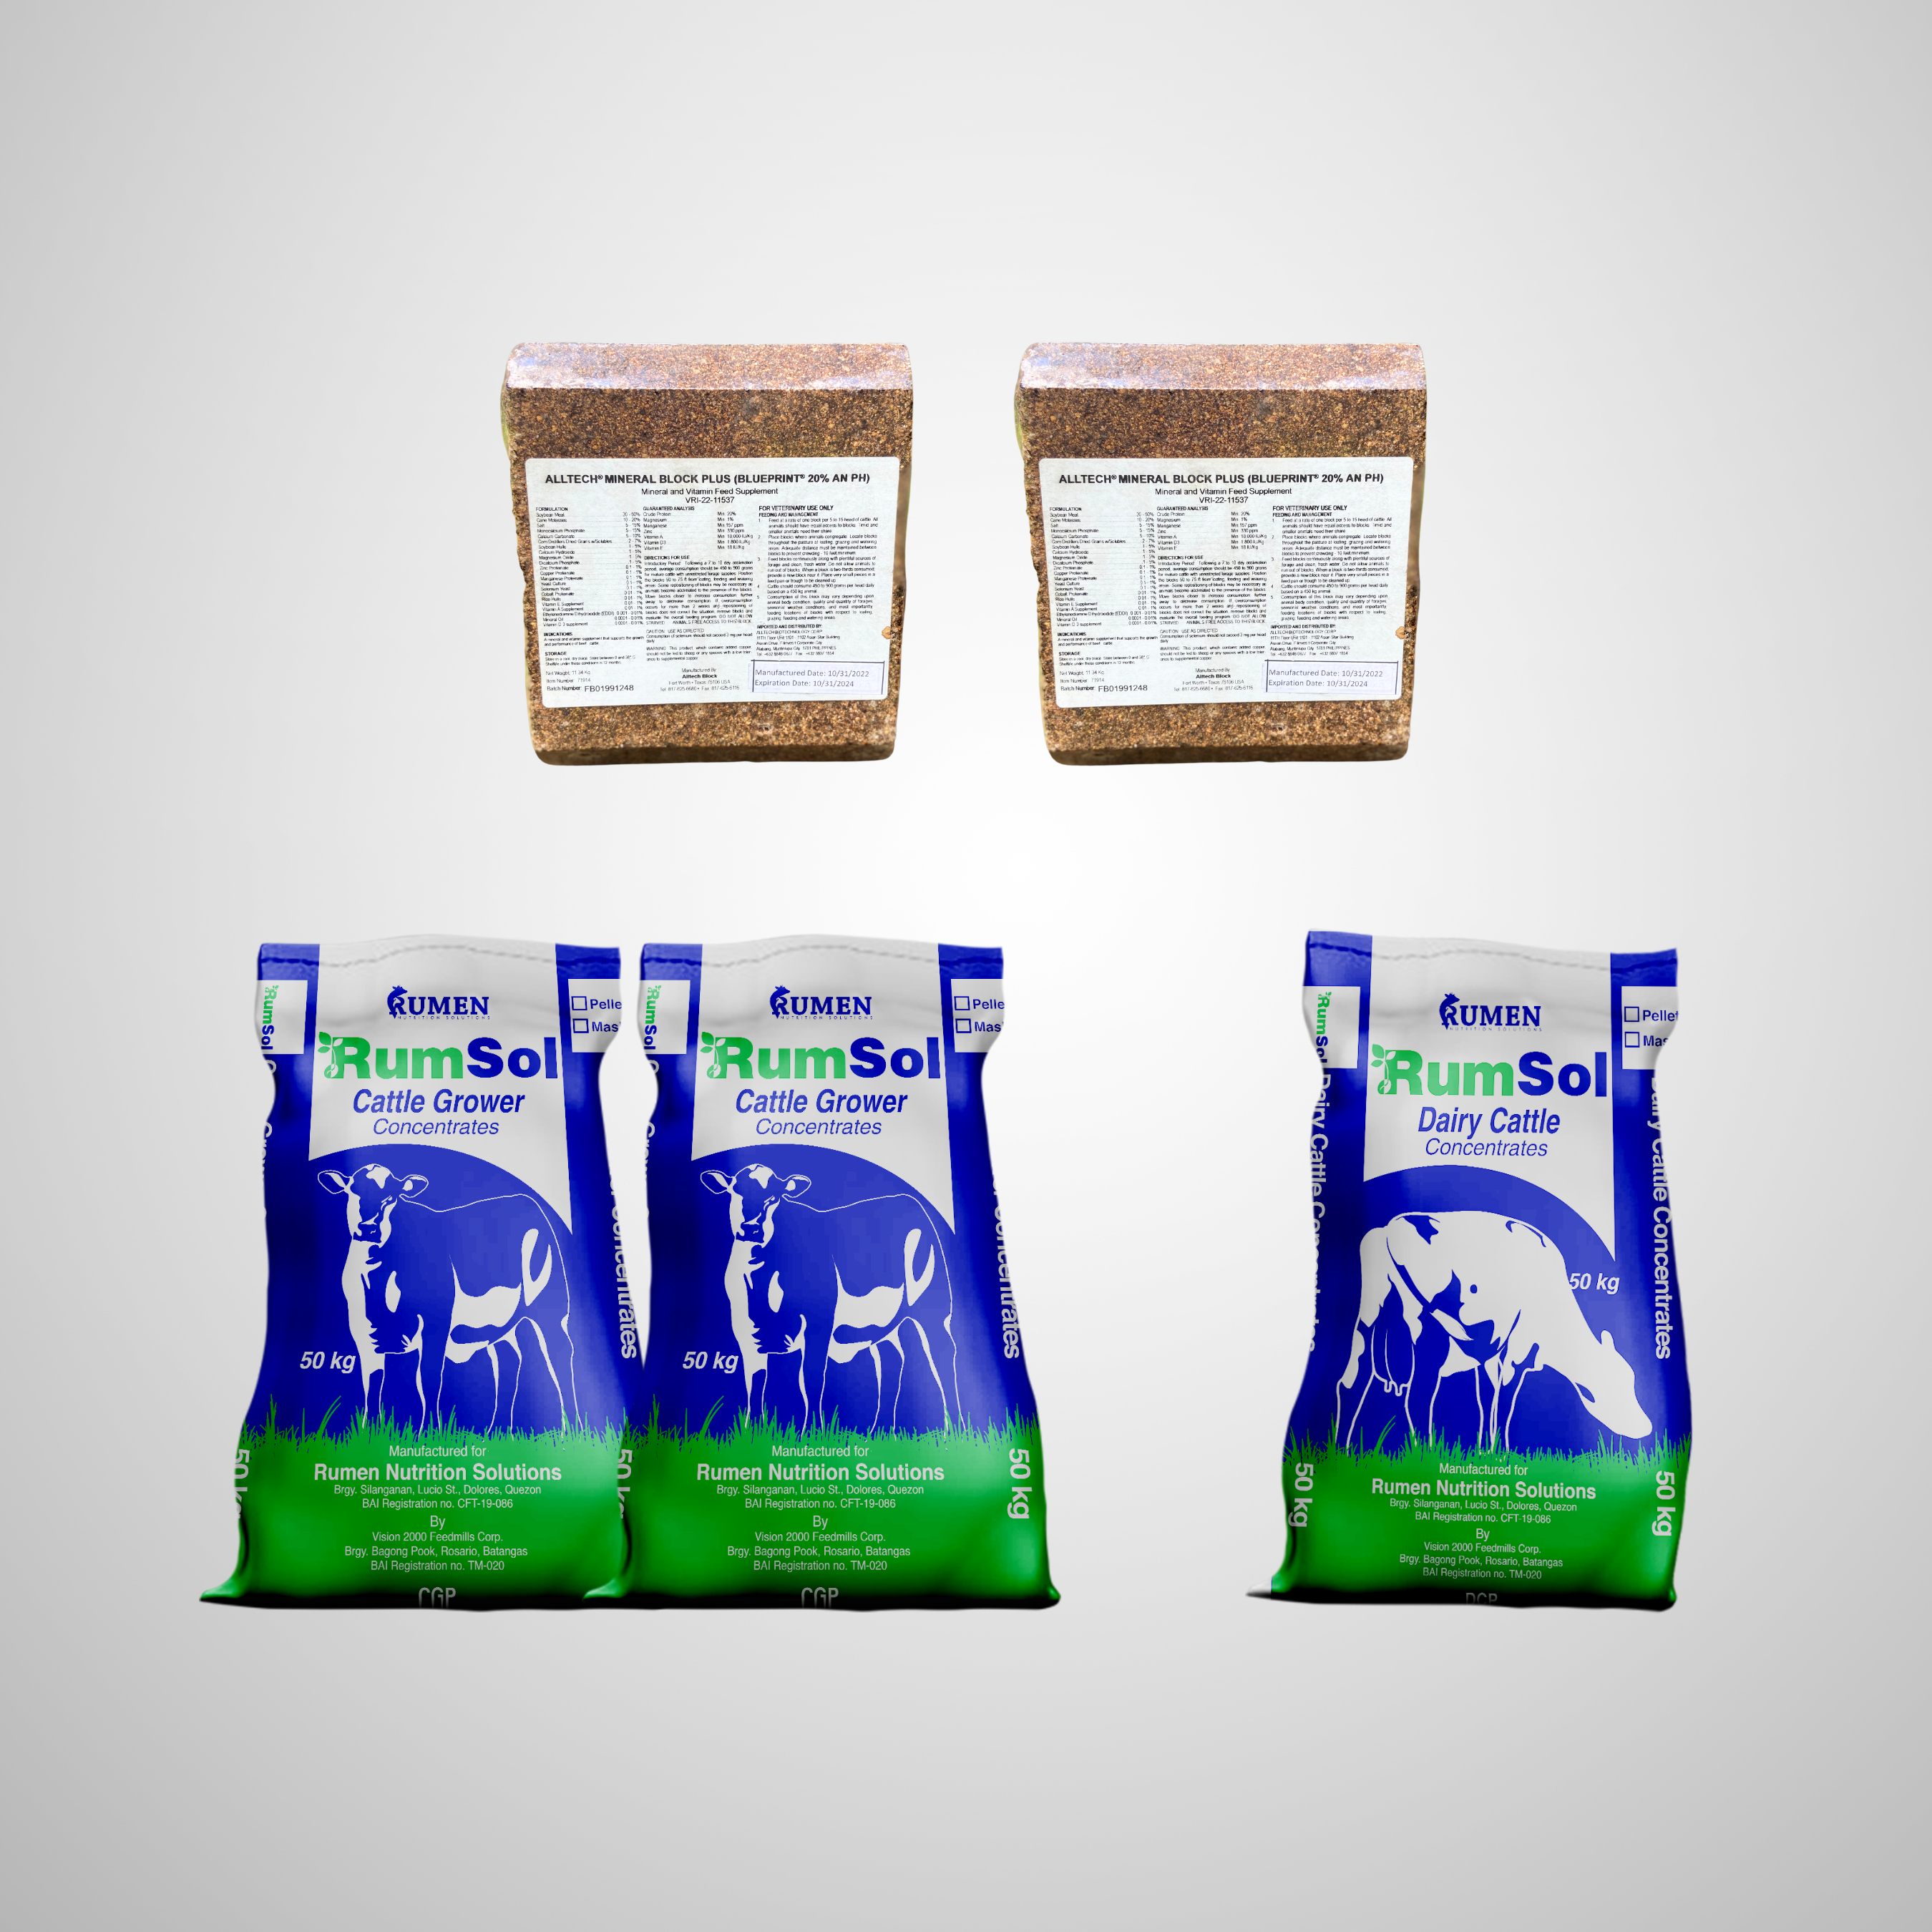 Bundle 13: Cattle Grower Concentrates, Alltech Blocks, & Dairy Cattle Concentrates